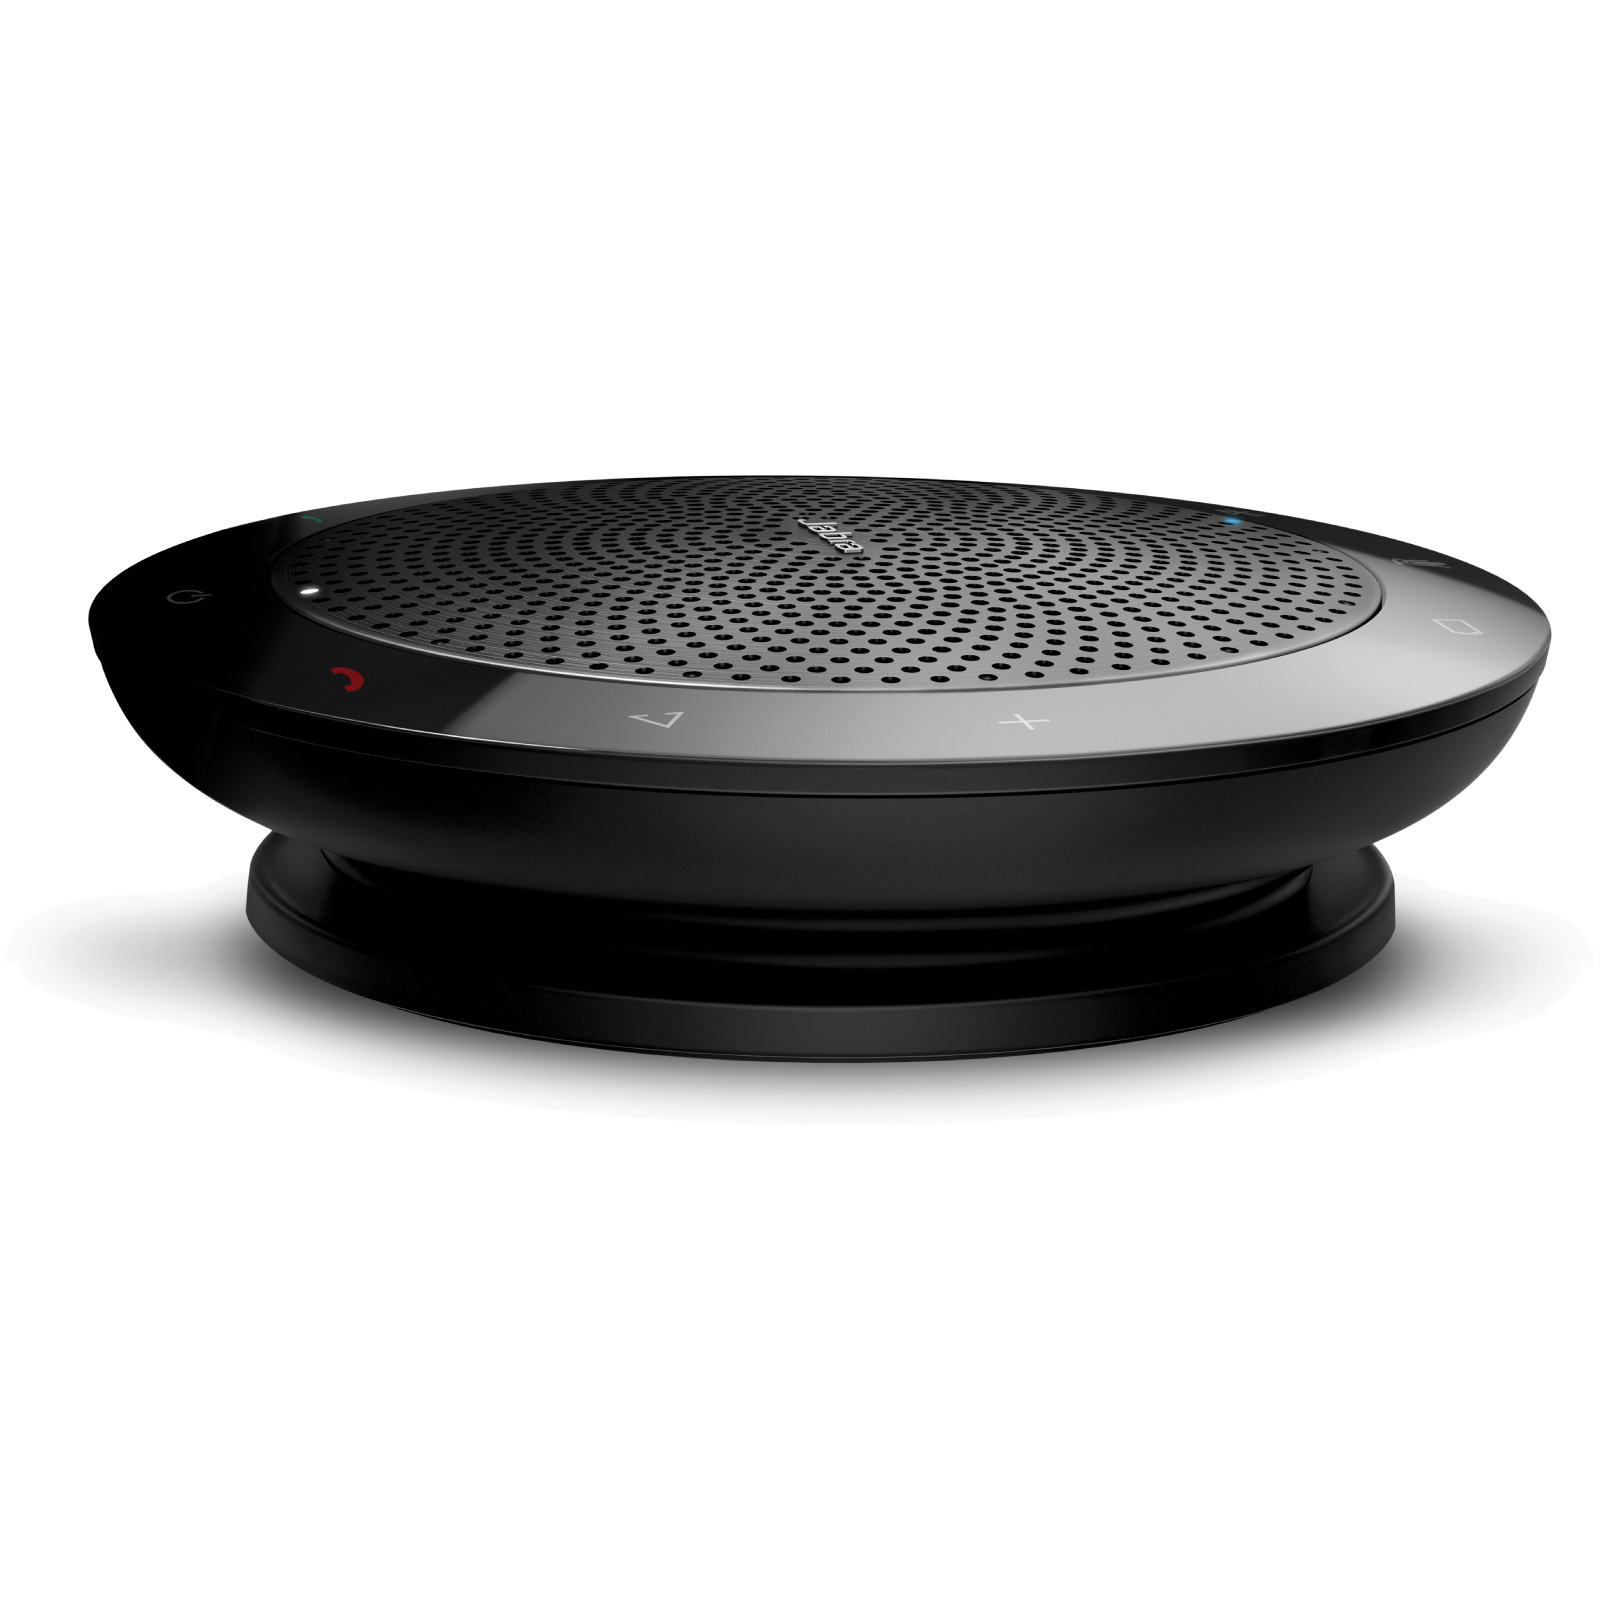 Jabra Connect 4s Portable Speakerphone Portable Speaker with Bluetooth and USB Connection, Amazing Audio for Music and Crystal-Clear Calls, Perfect